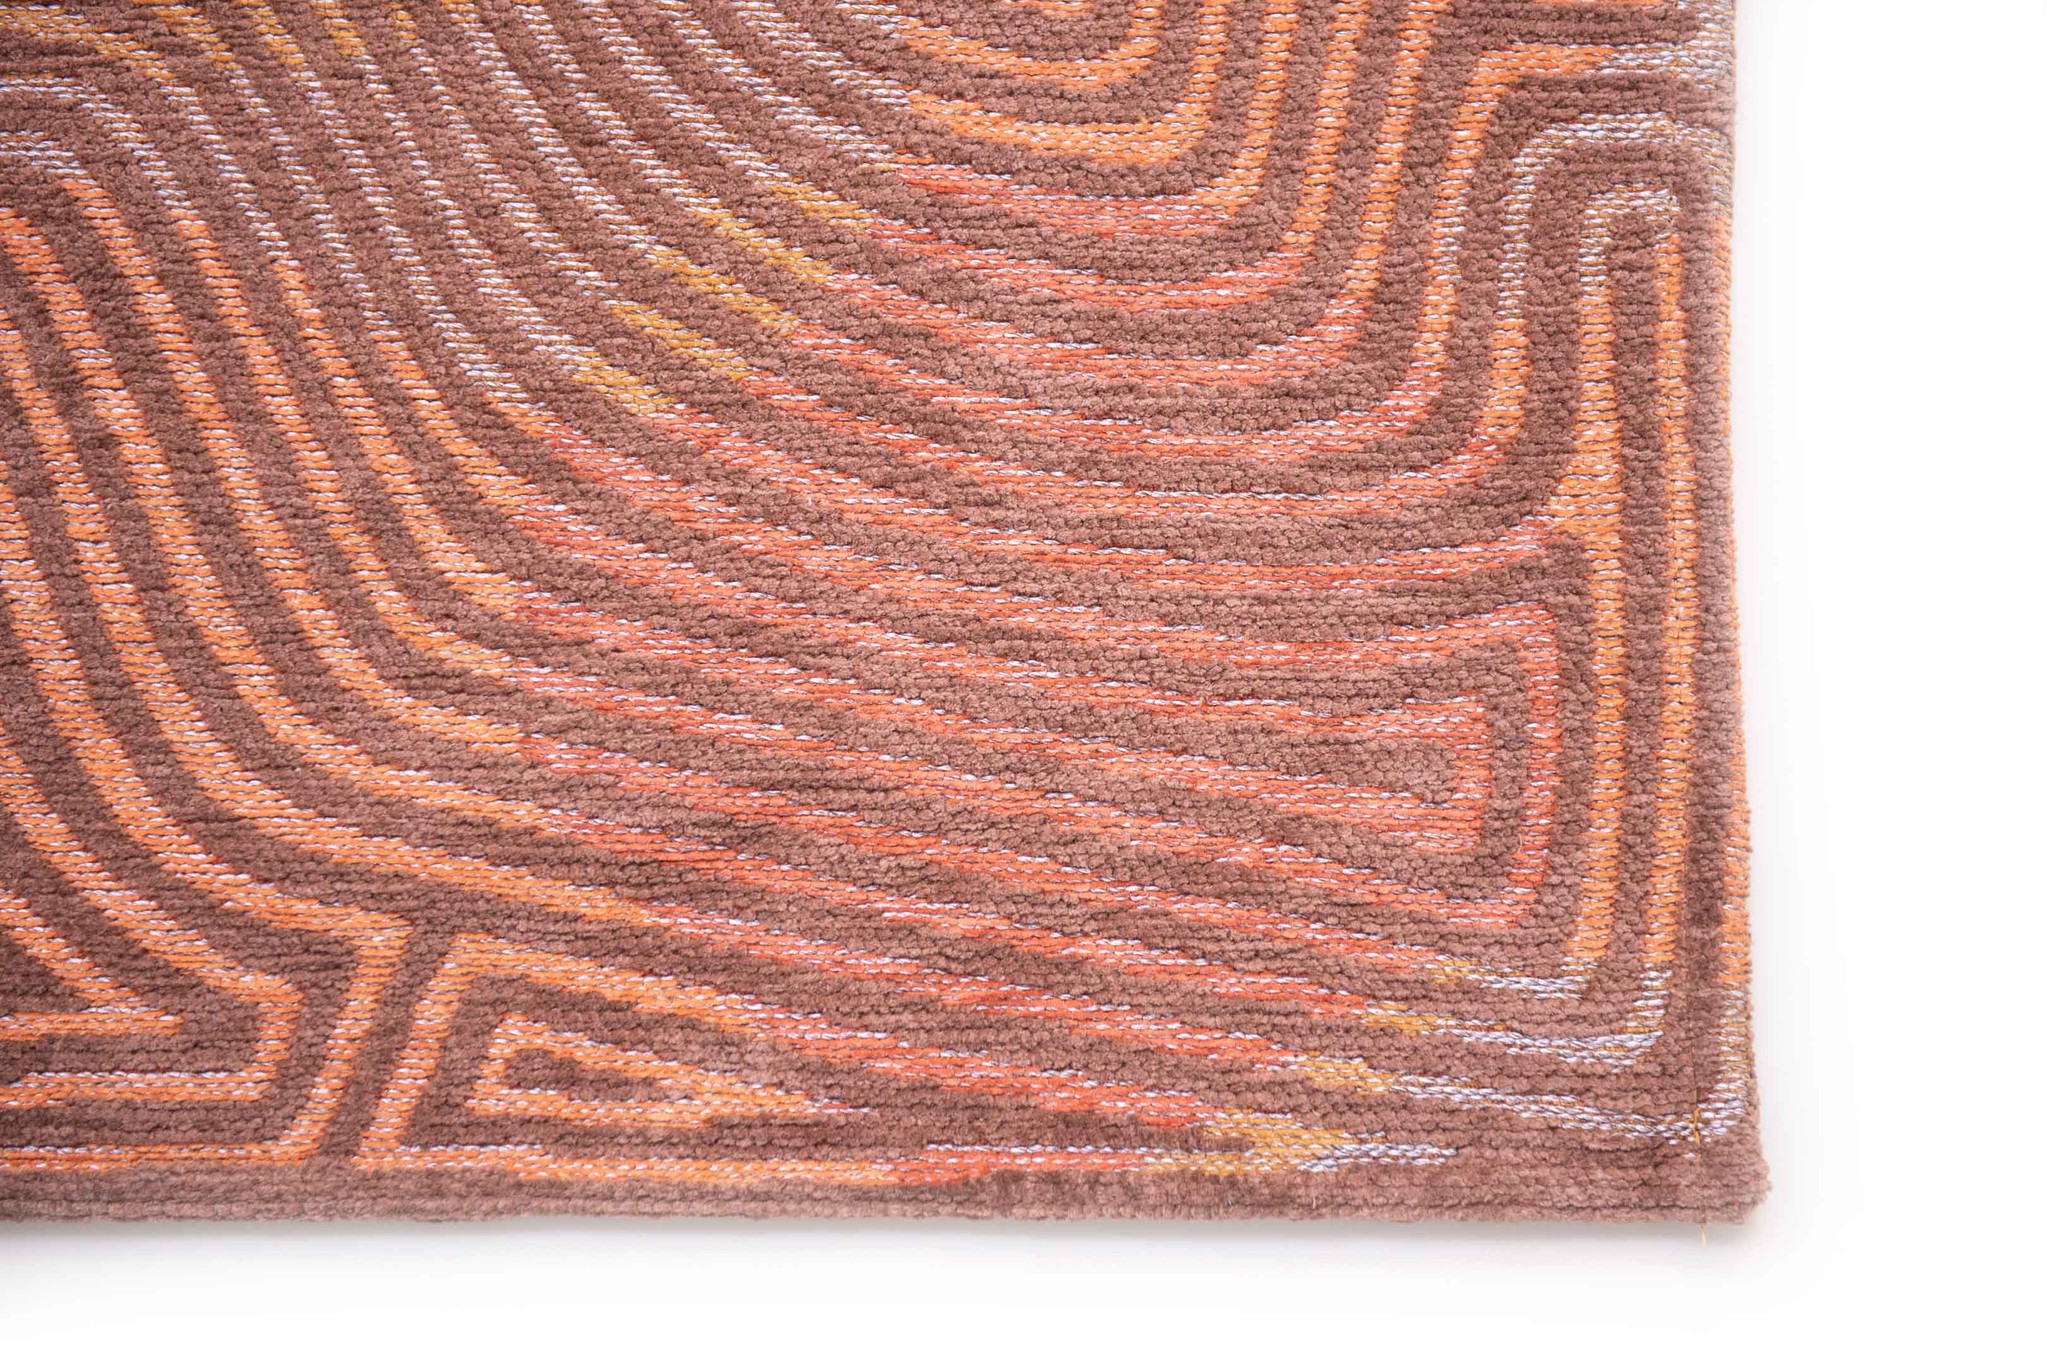 Brown Waves Flatwoven Rug ☞ Size: 2' 7" x 5' (80 x 150 cm)